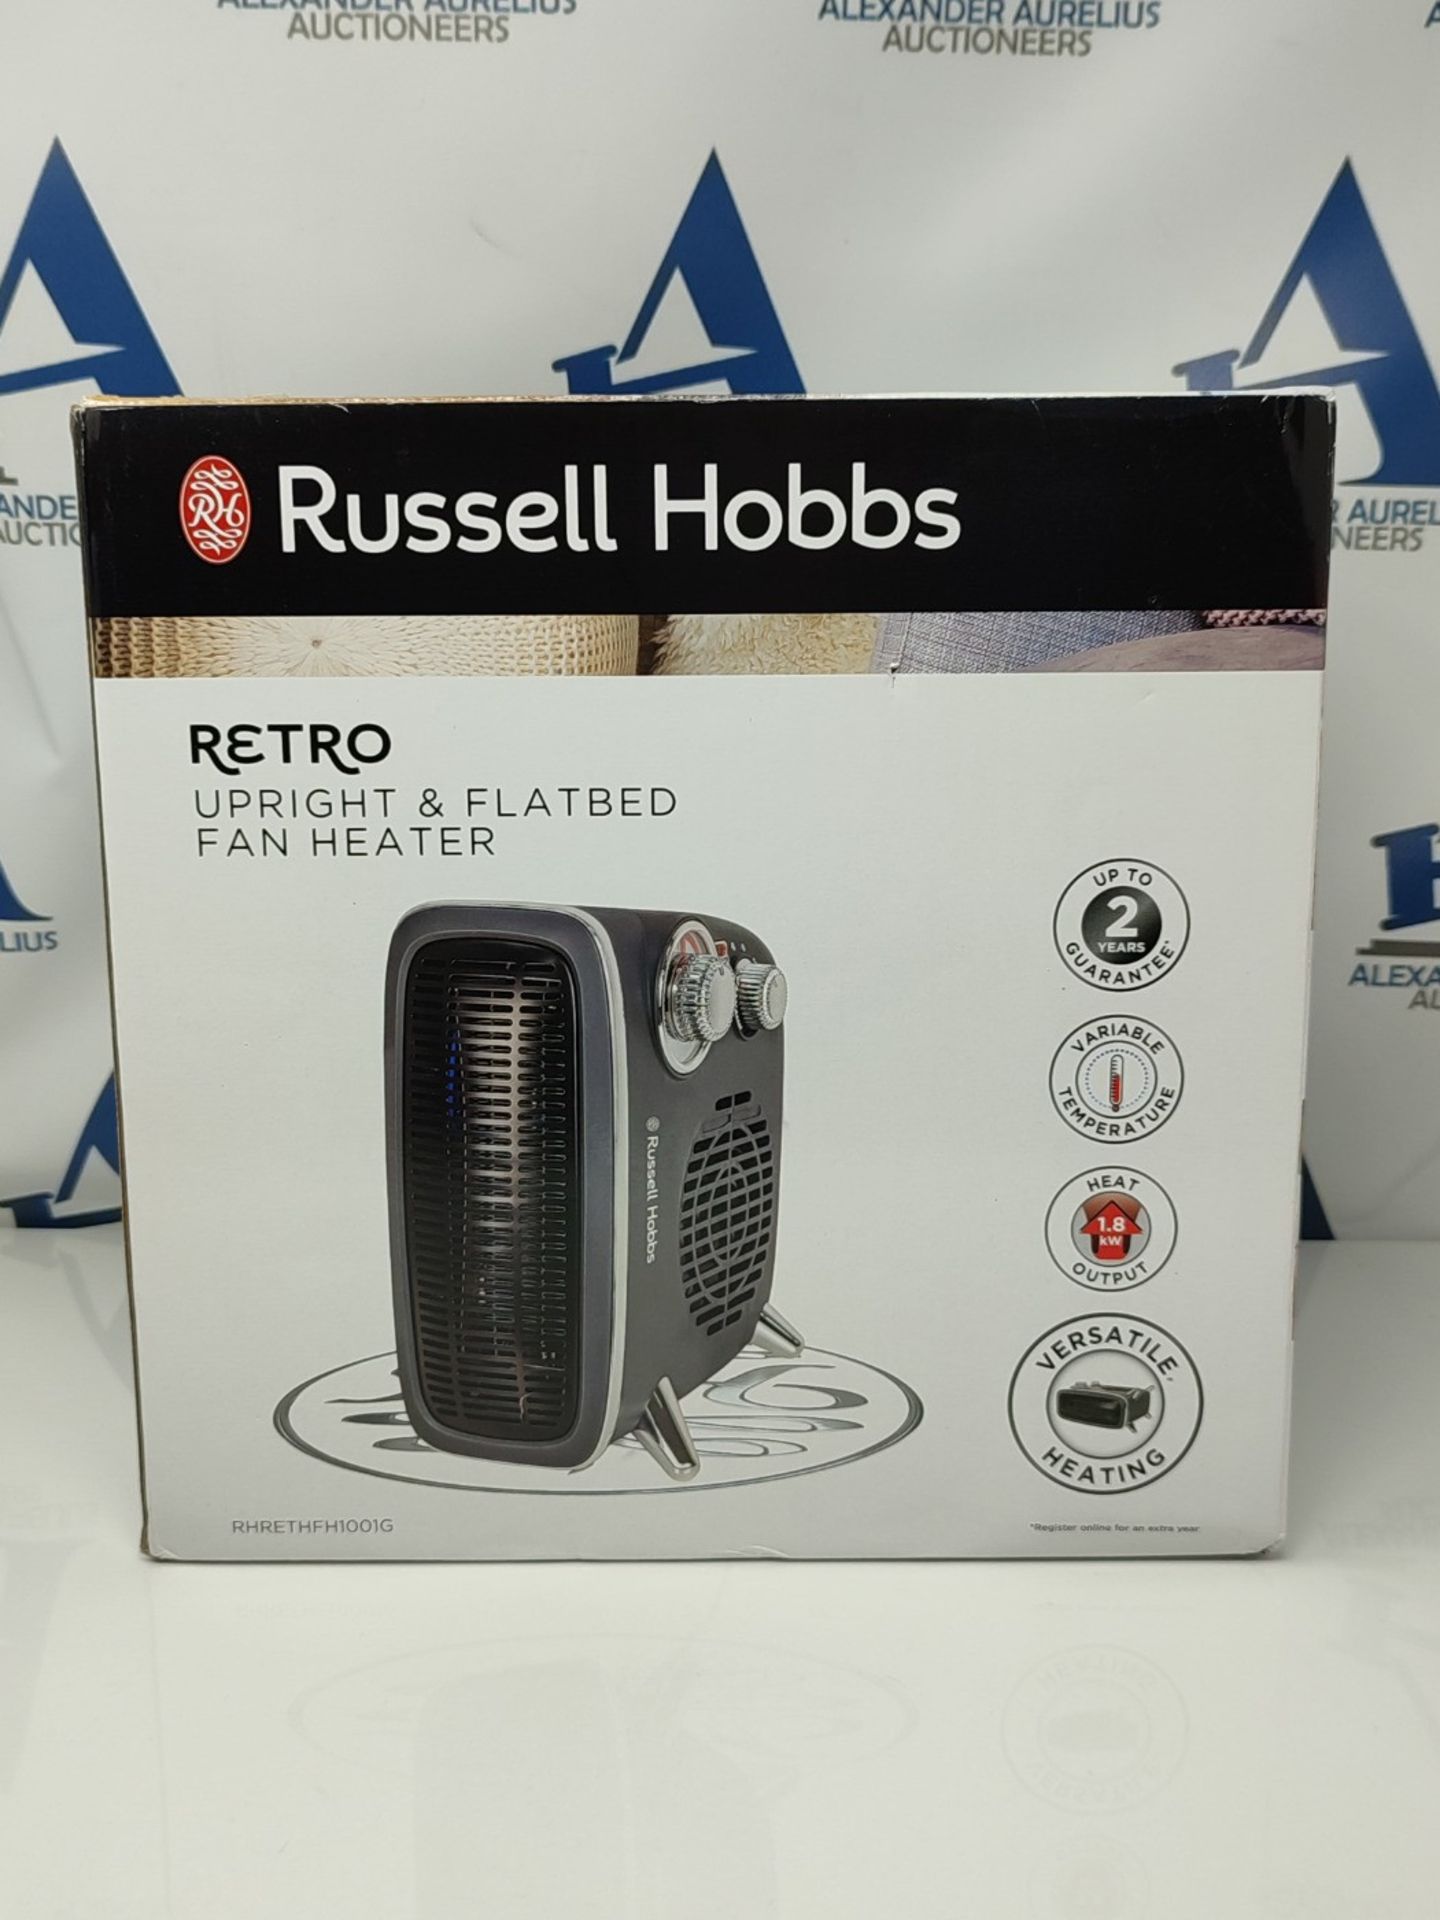 Russell Hobbs 1800W/1.8KW Electric Heater, Retro Horizontal/Vertical Fan Heater in Gre - Image 2 of 3